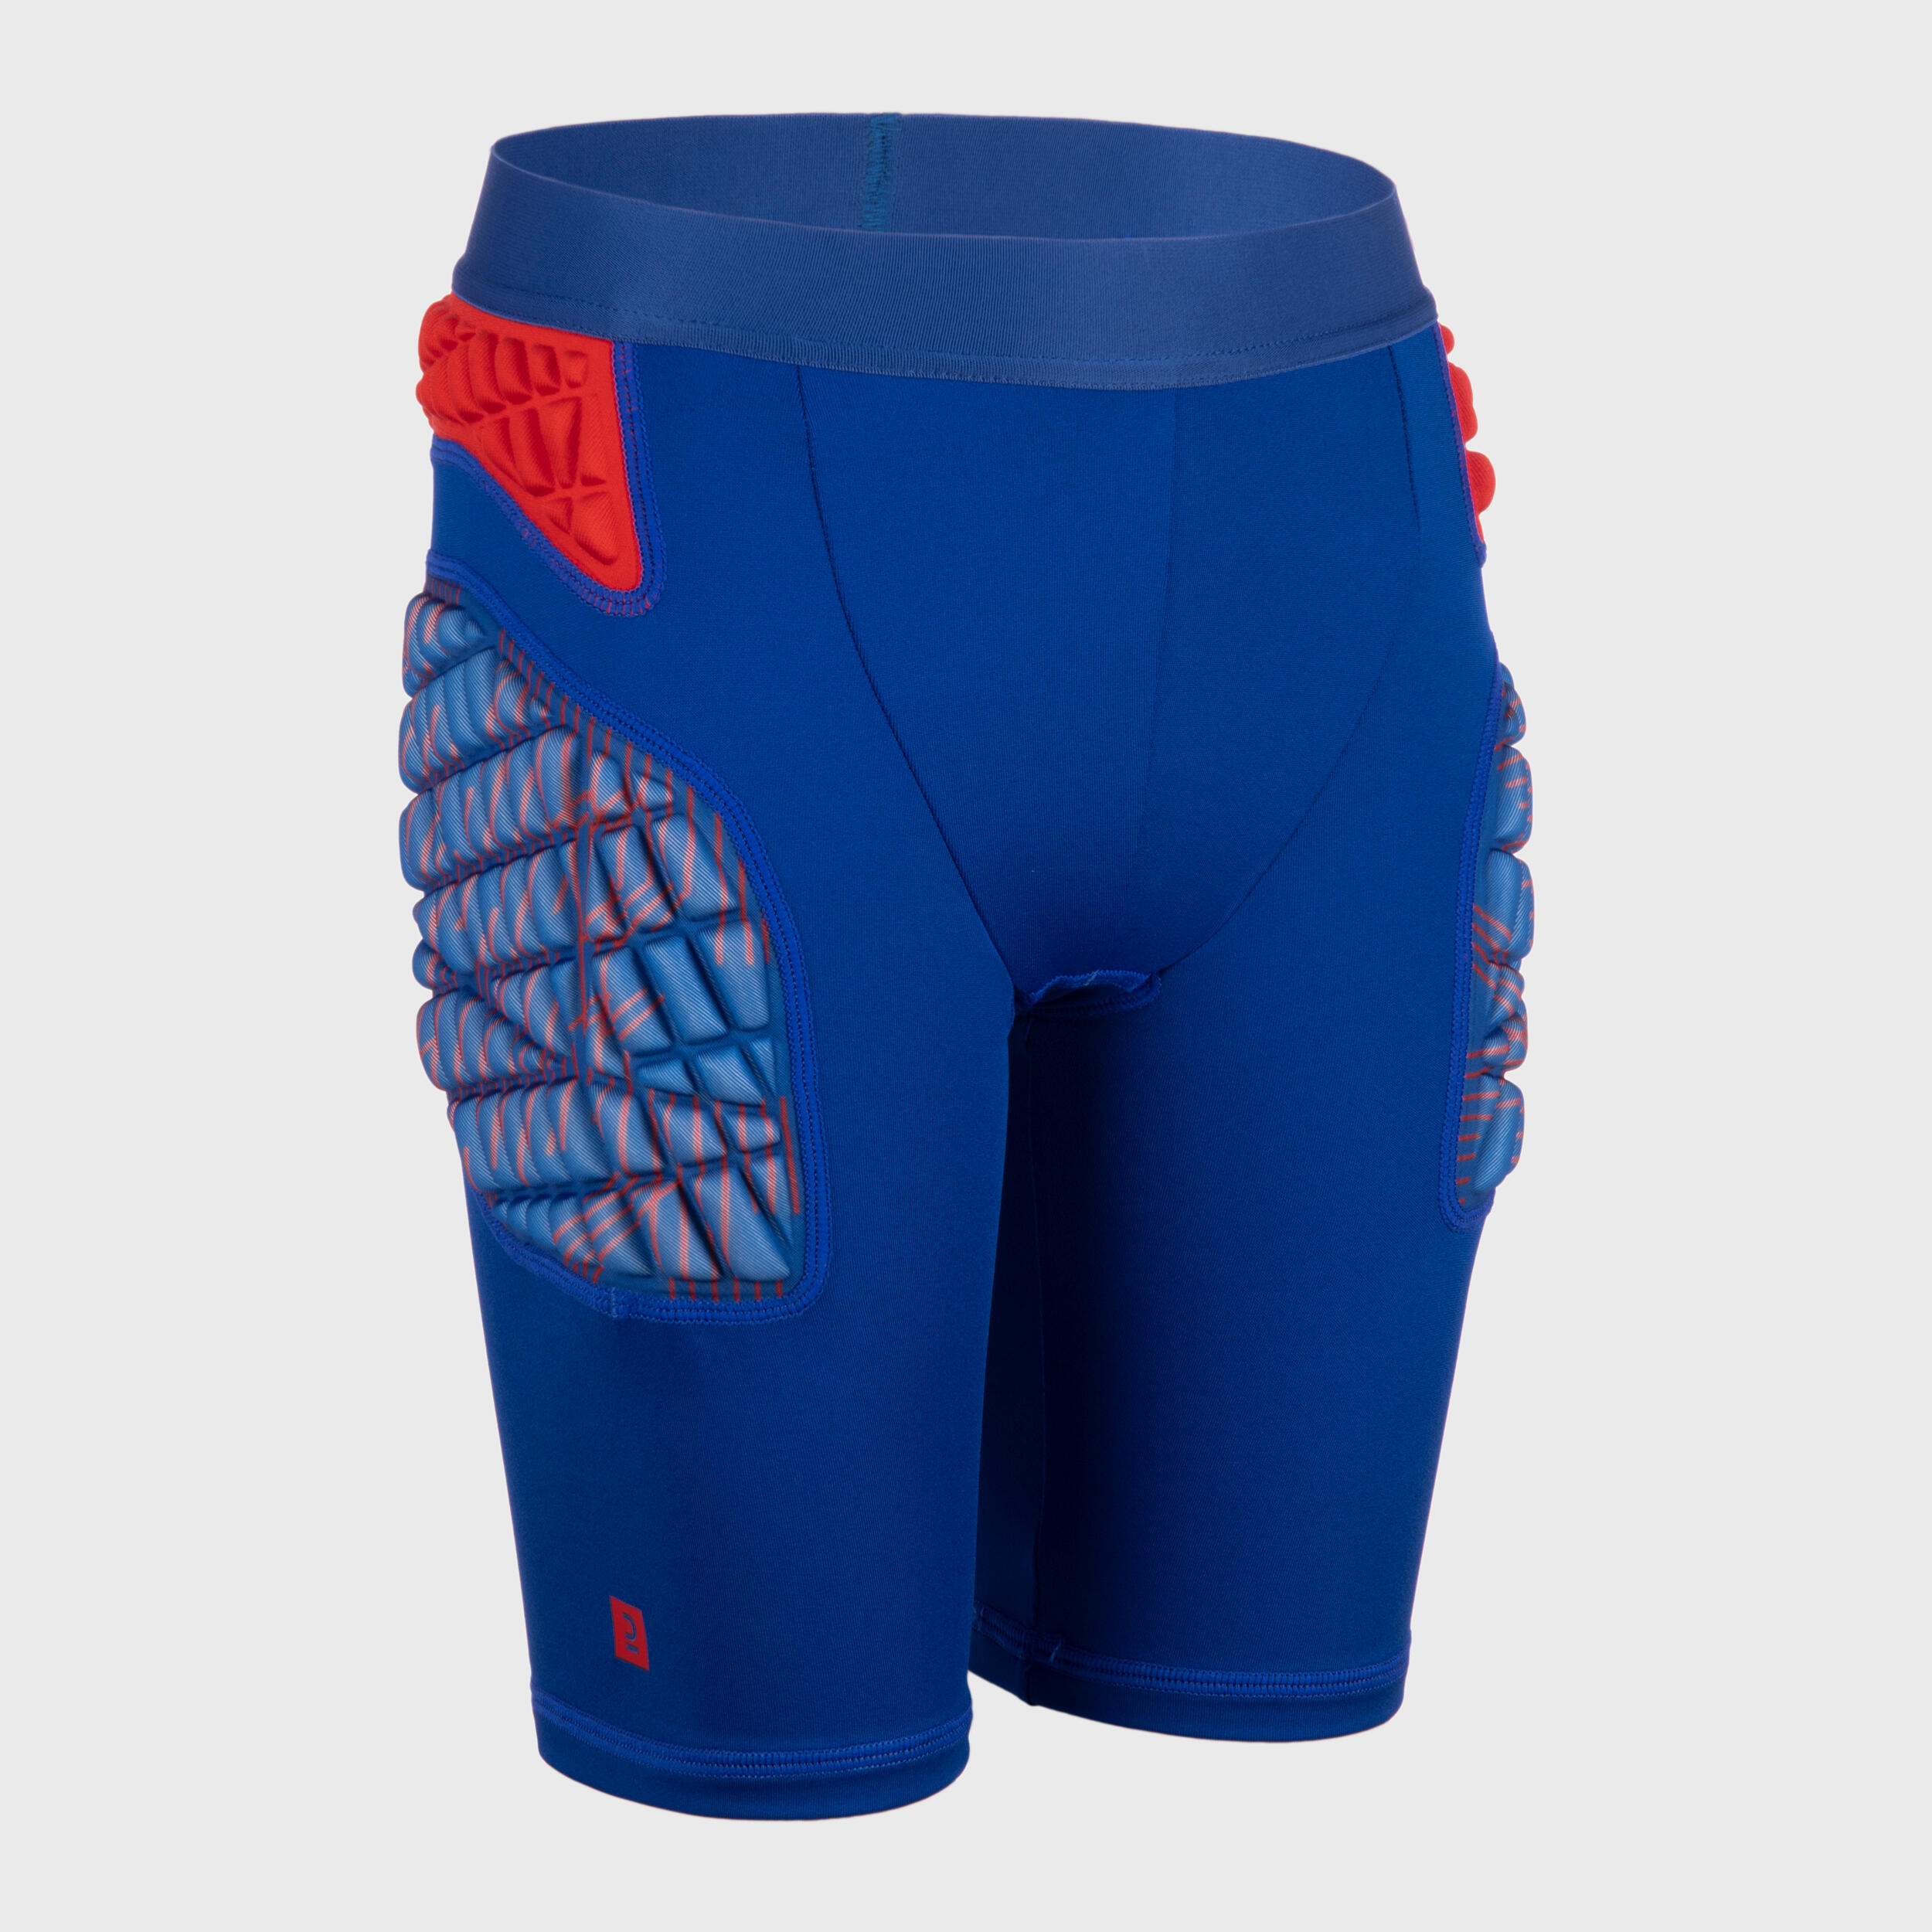 Kids' Protective Rugby Undershorts R500 - Blue/Red 1/7